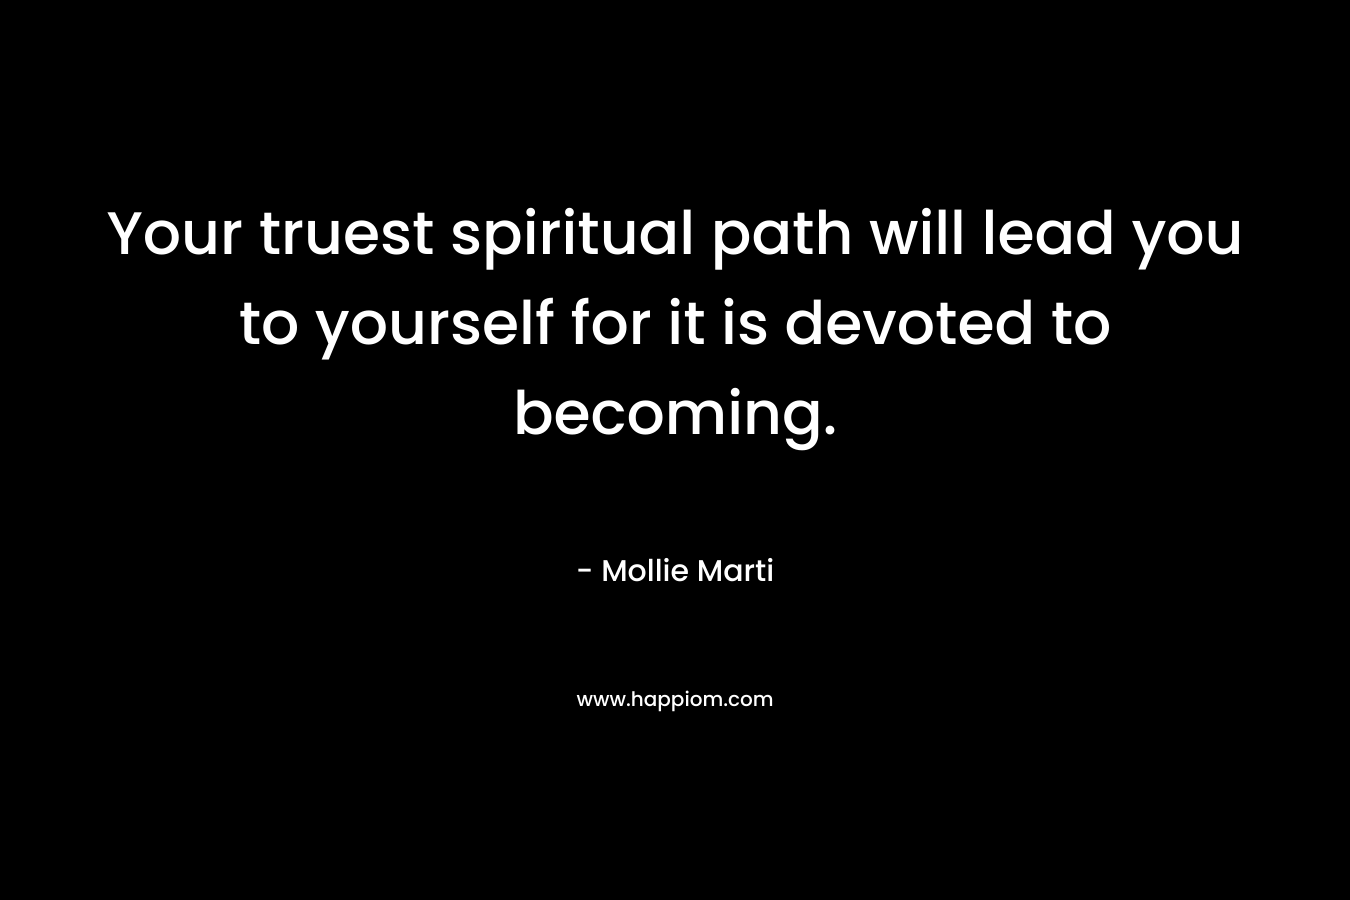 Your truest spiritual path will lead you to yourself for it is devoted to becoming.